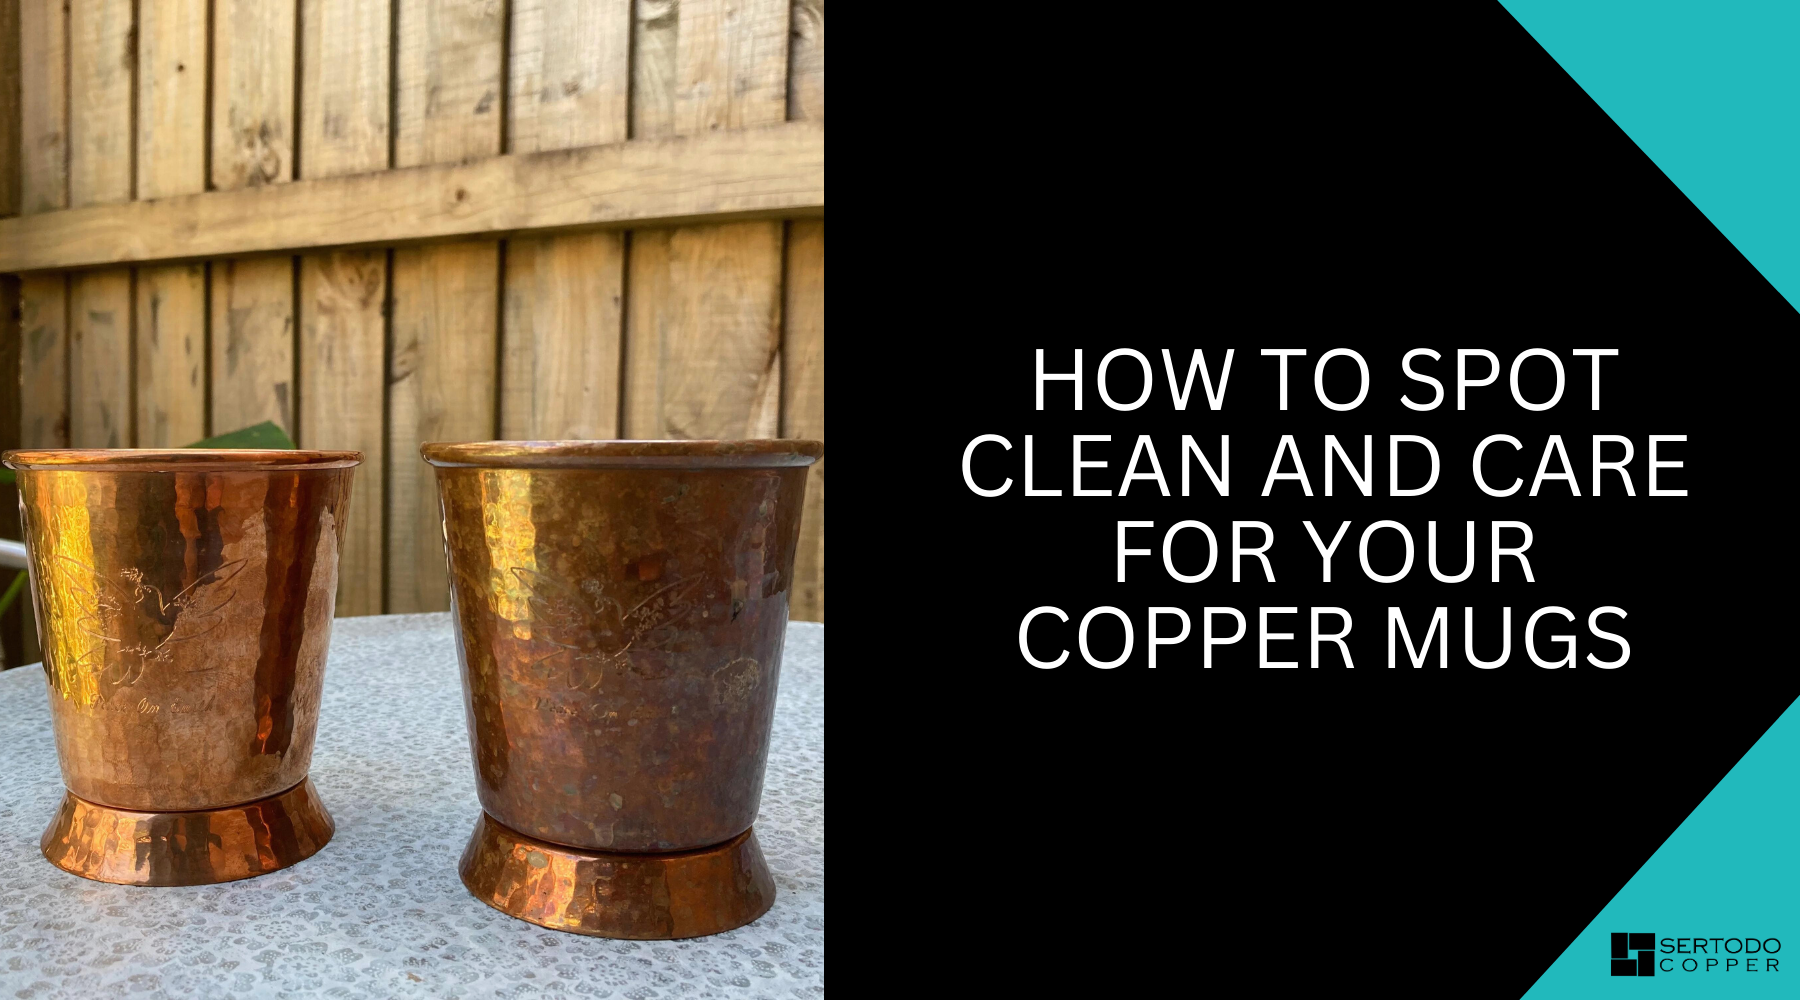 How to spot clean and care for your copper mugs